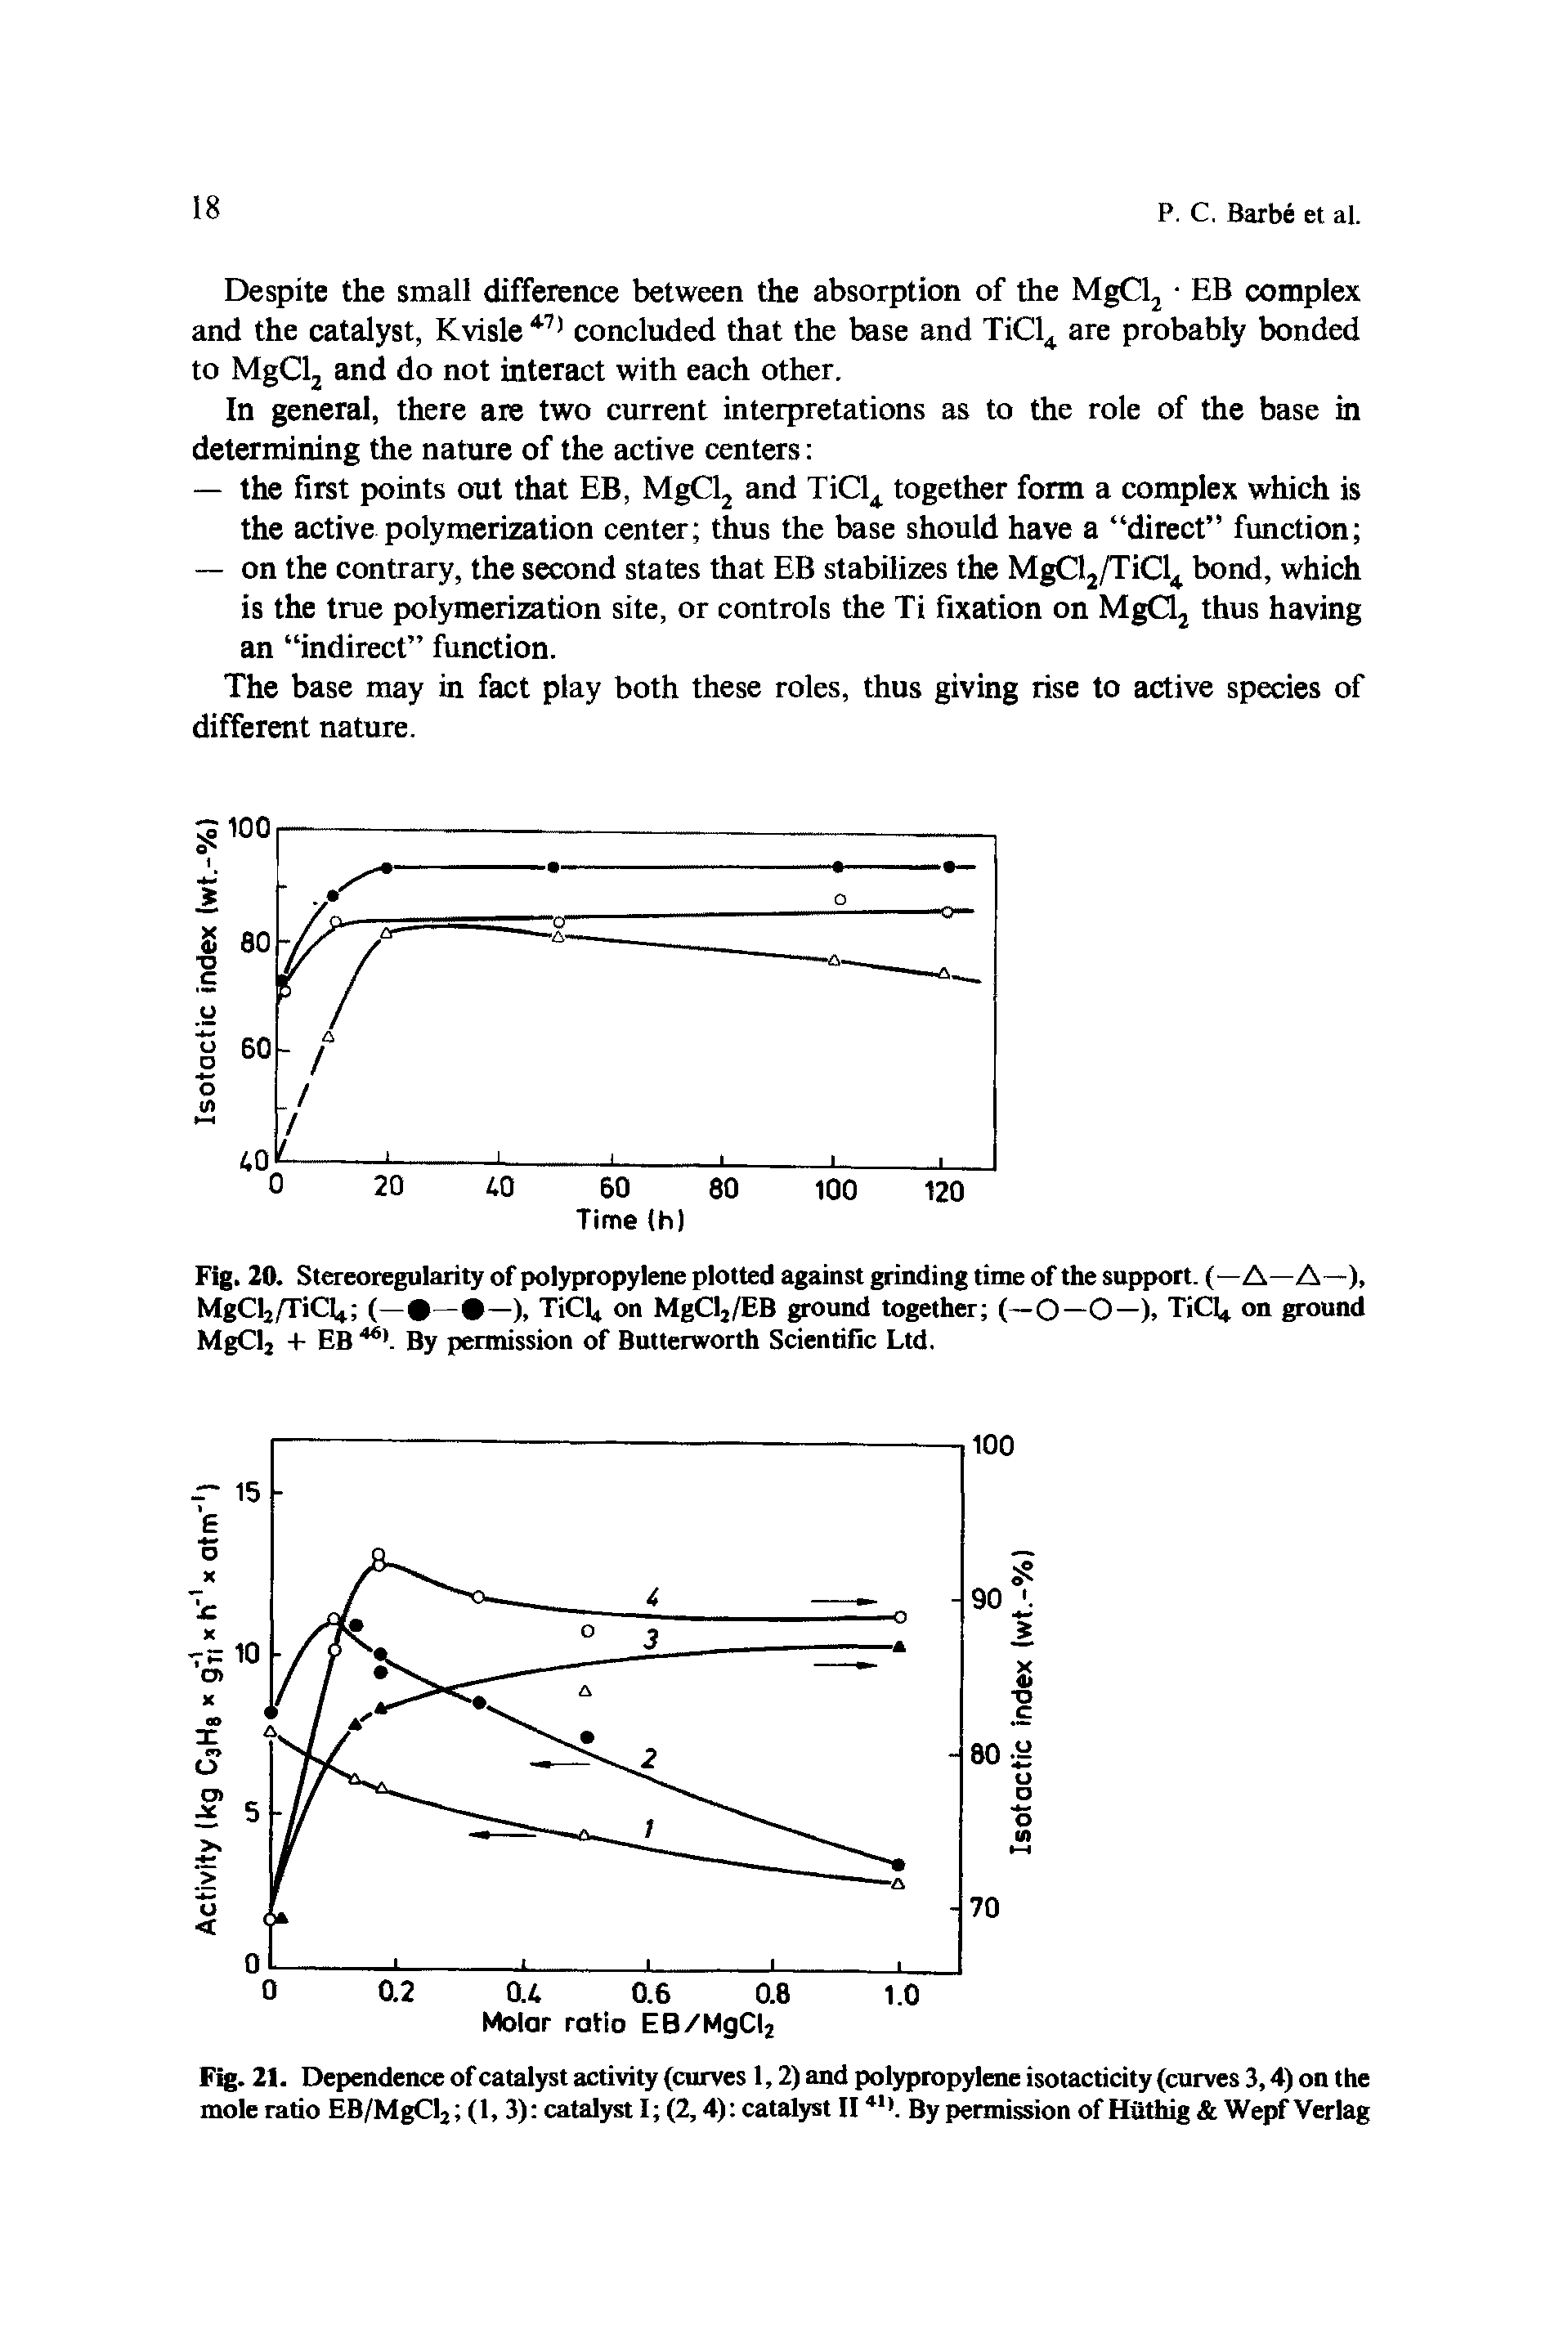 Fig. 20. Stereoregularity of polypropylene plotted against grinding time of the support. (—A—A—), MgCij/TiCl (— — —), TiCh on MgClj/EB ground together (—0—0—), TiCl on ground MgClj + EB 46t. By permission of Butterworth Scientific Ltd.